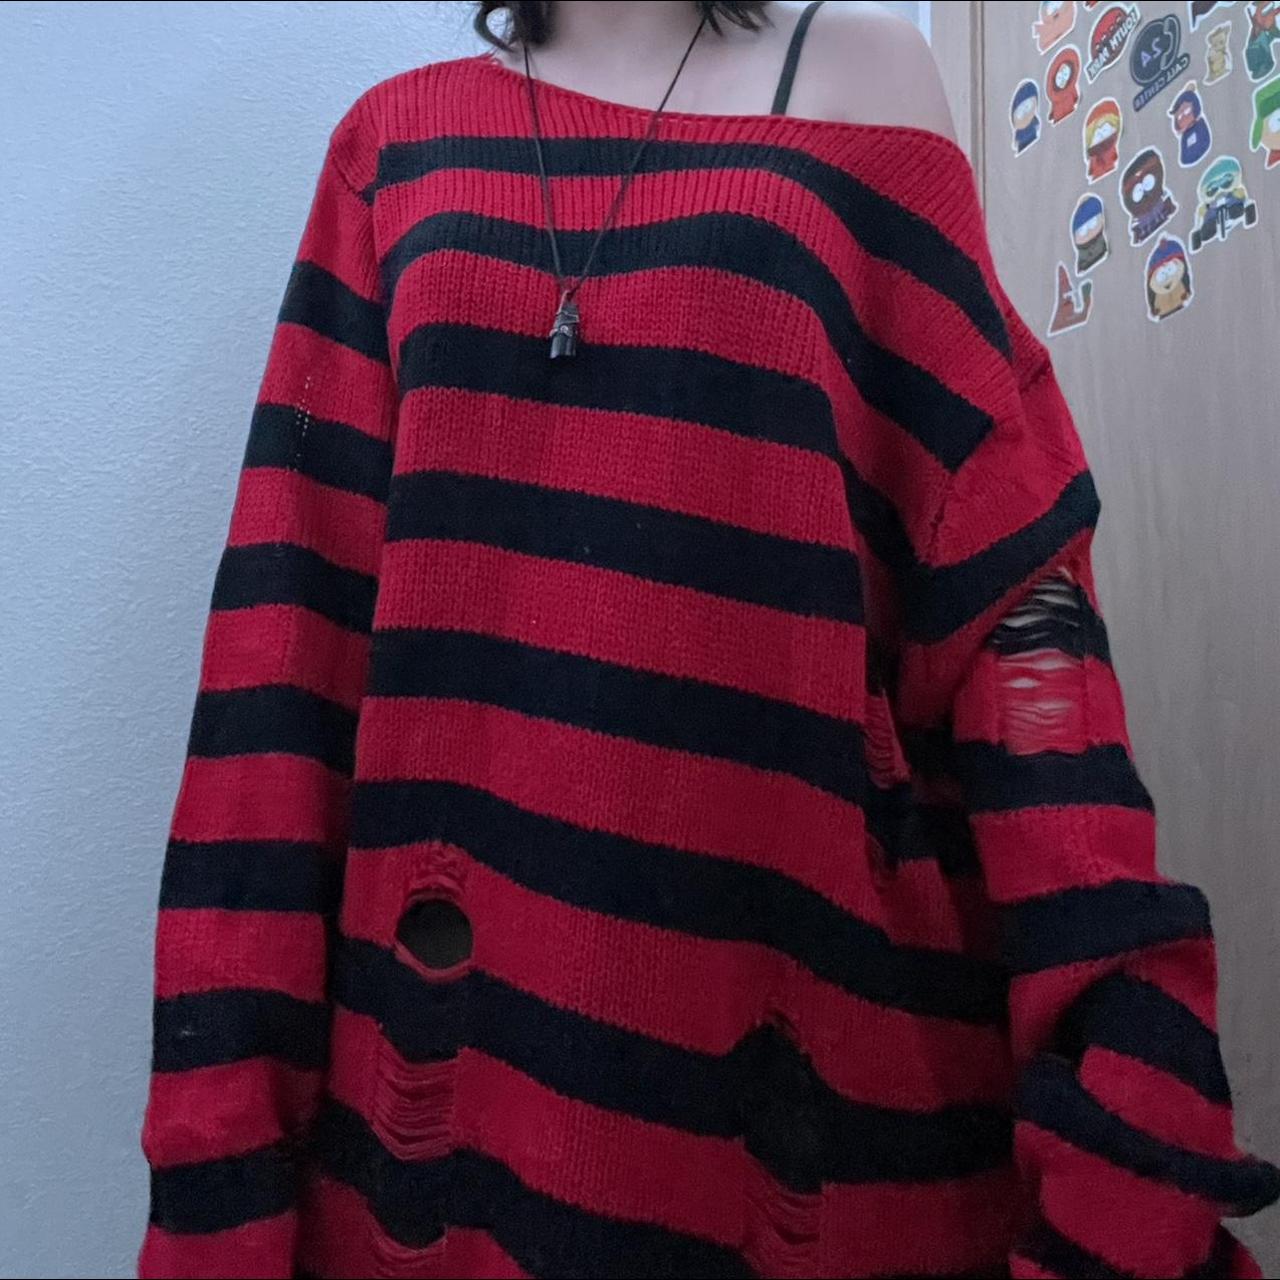 Hot Topic Women's Red and Black Jumper